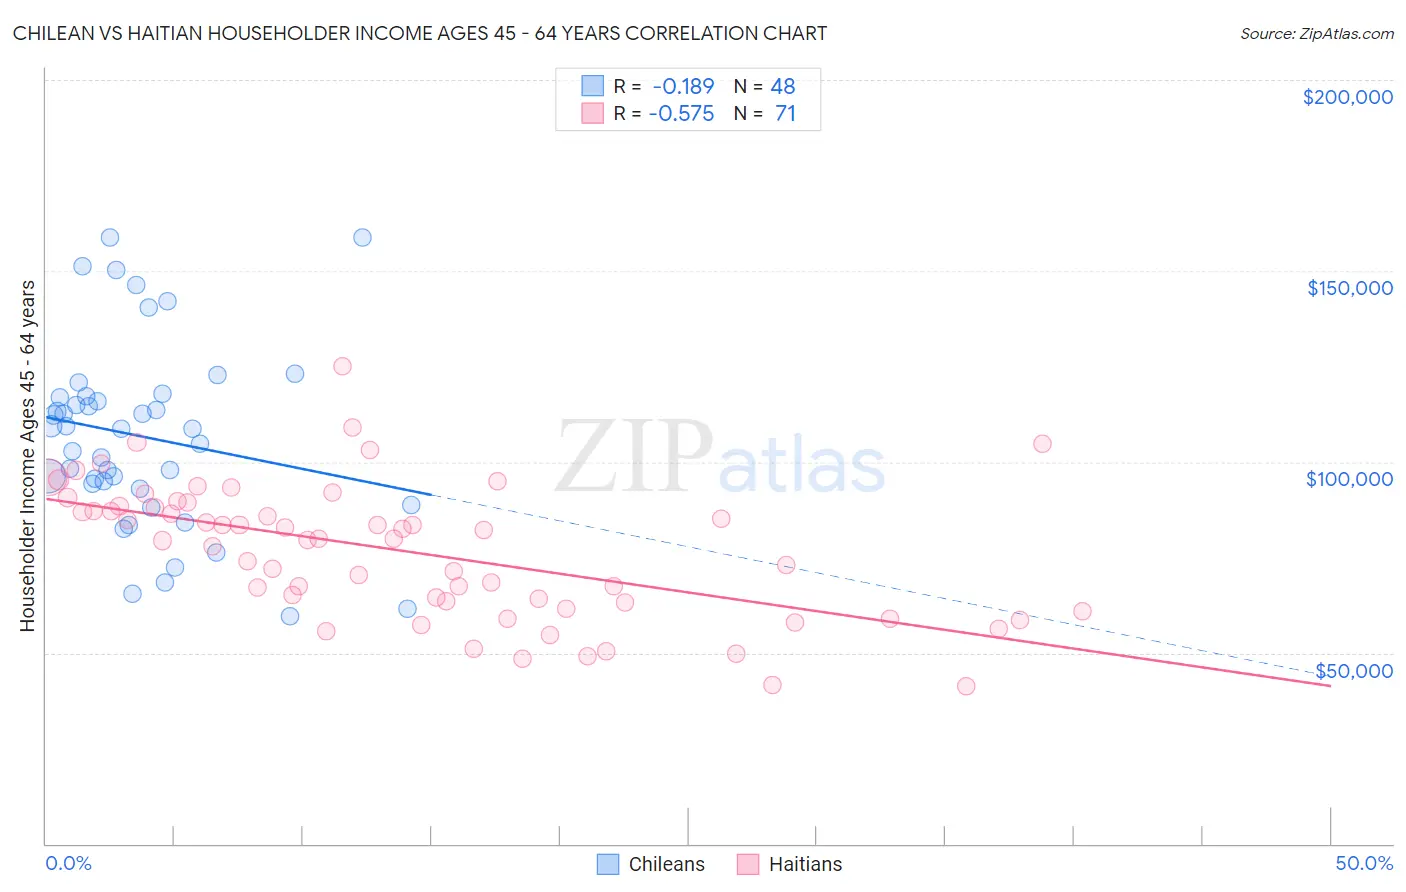 Chilean vs Haitian Householder Income Ages 45 - 64 years